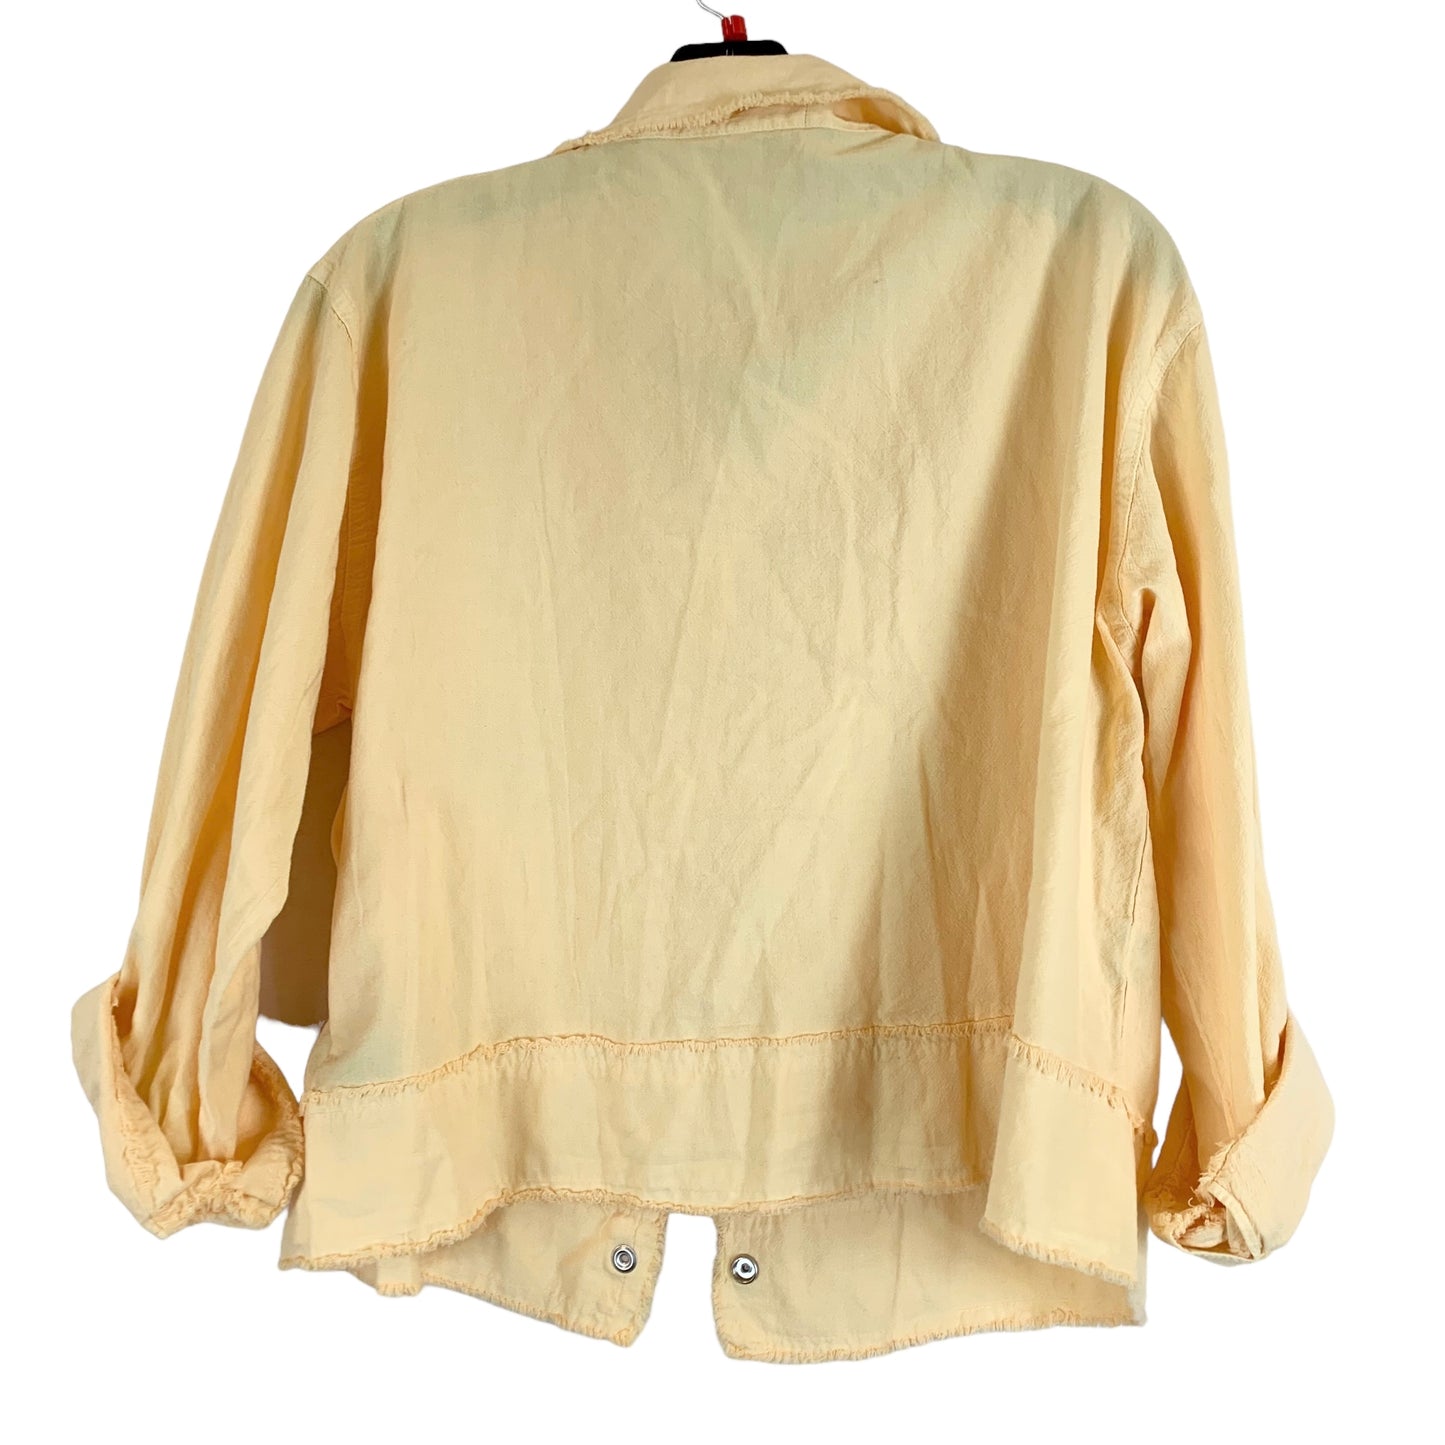 Yellow Top Long Sleeve Glocam, Size M